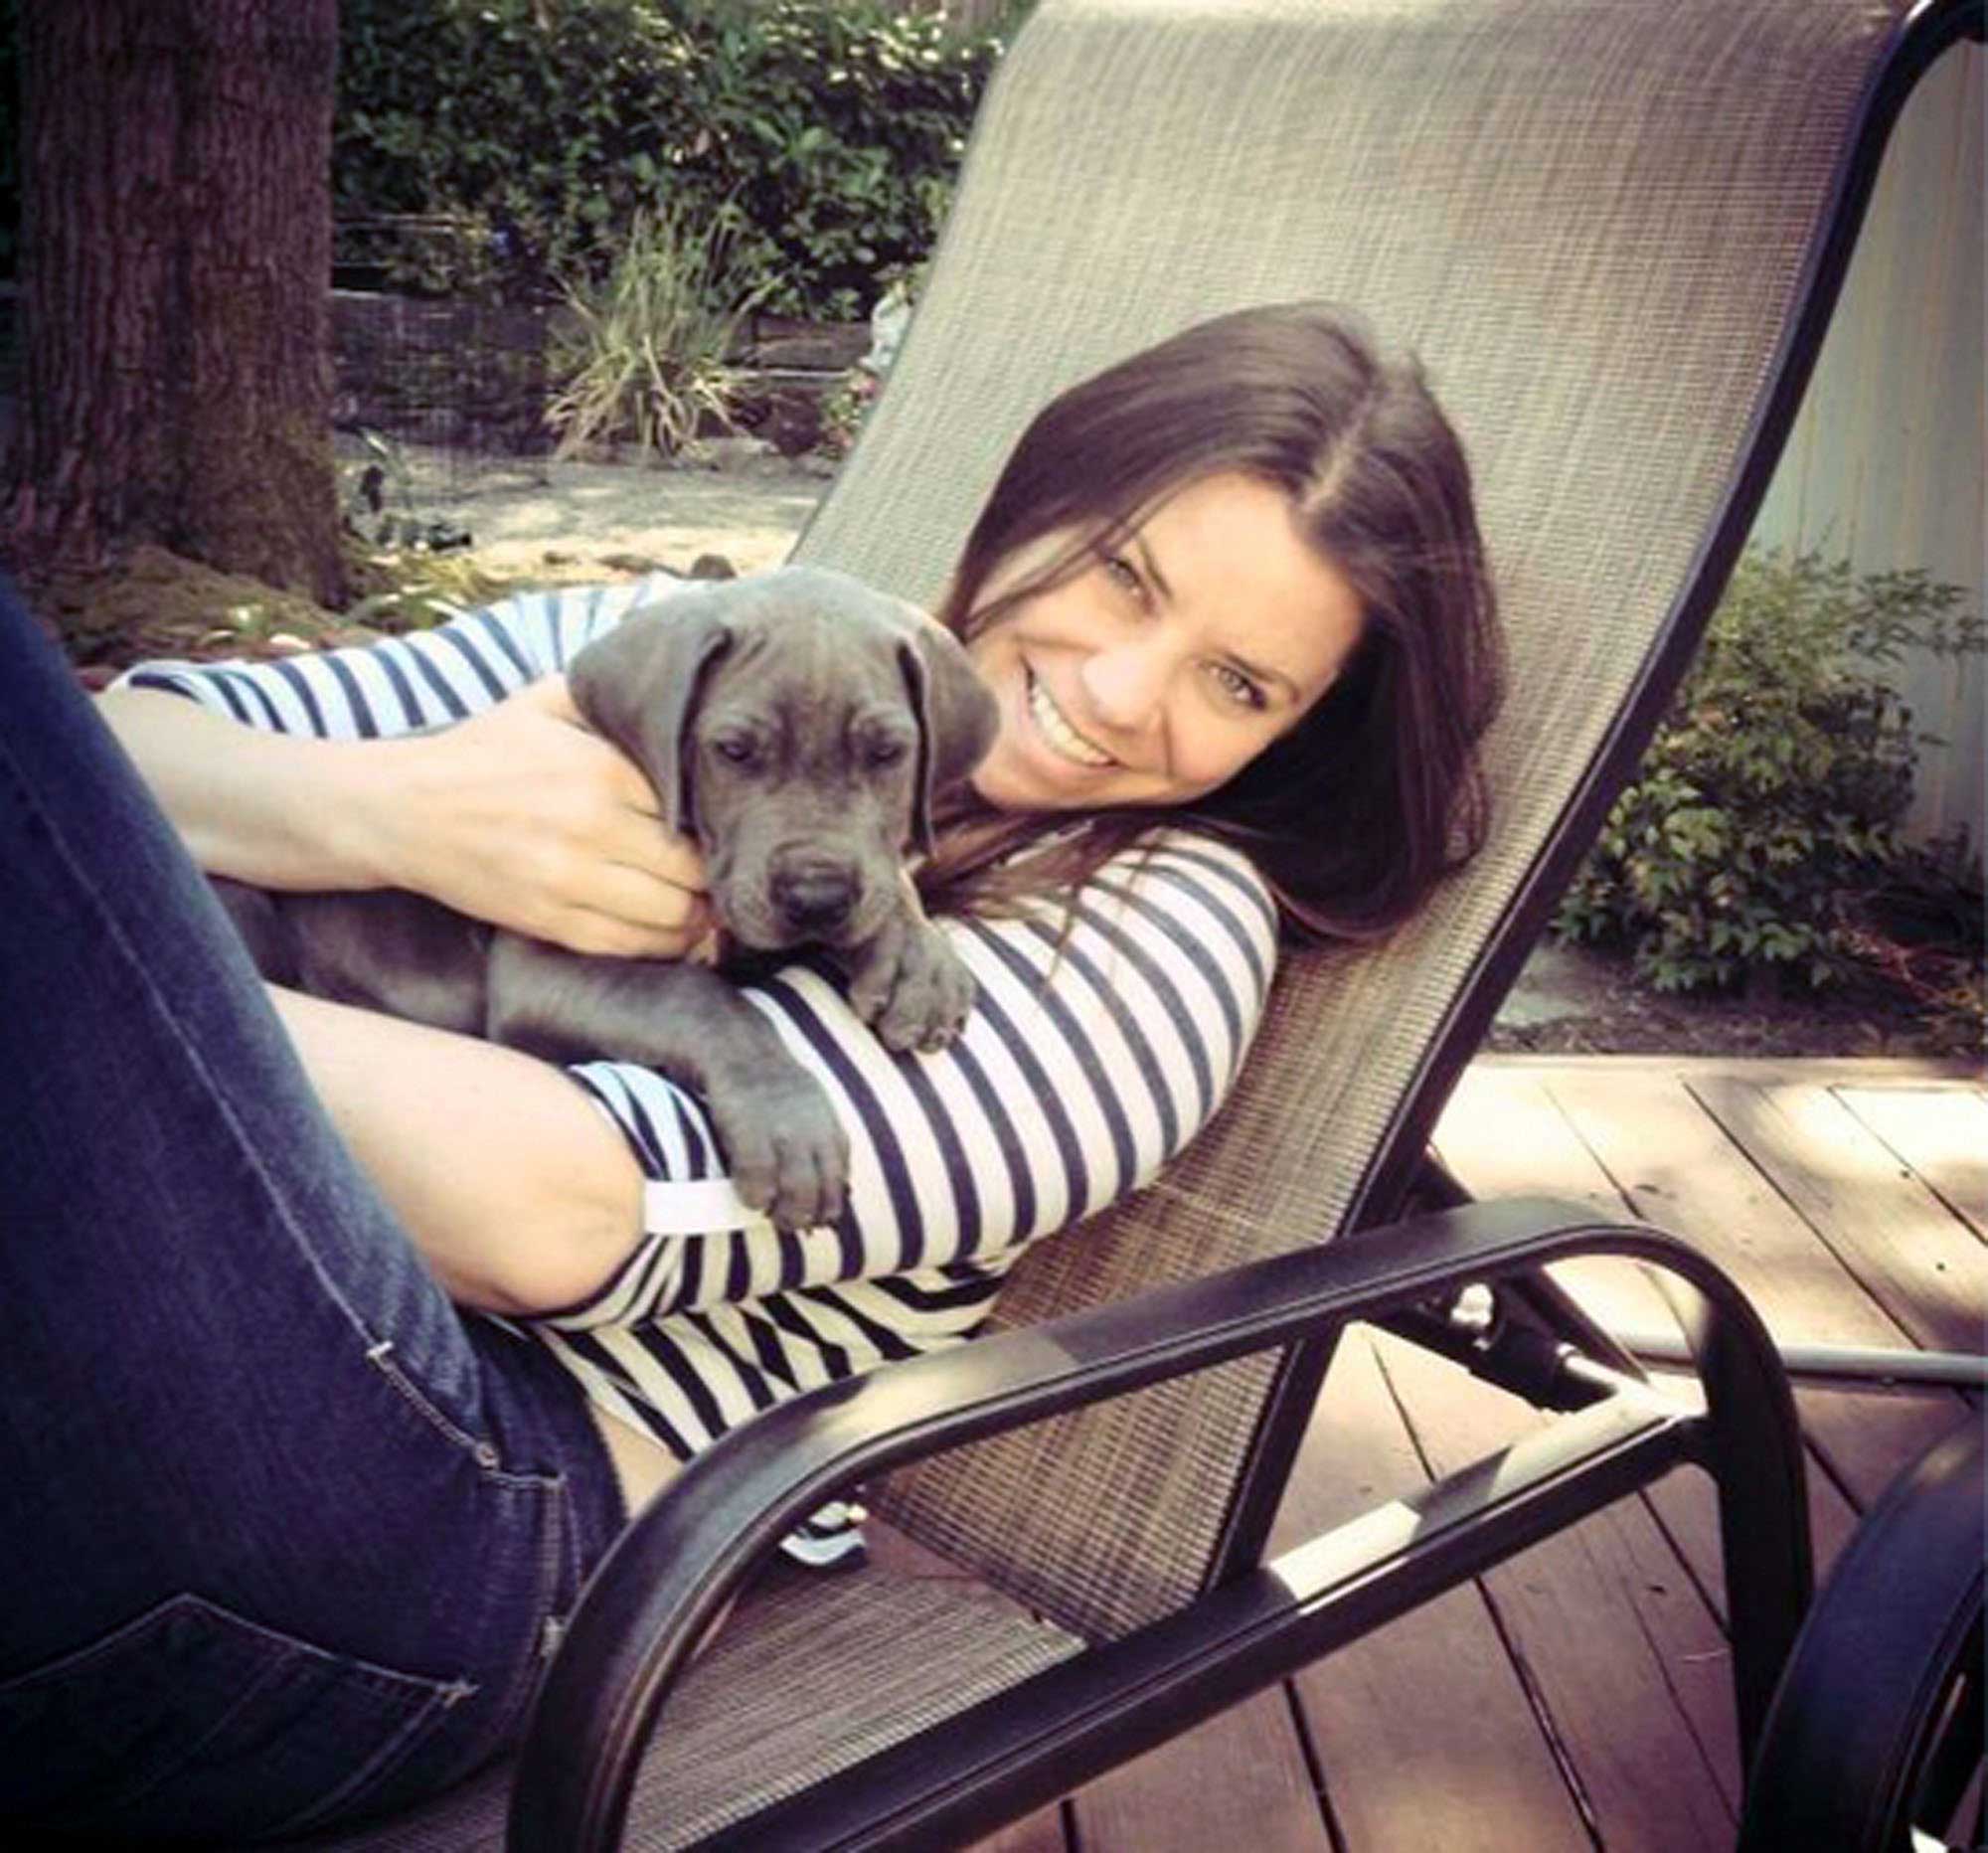 Brittany Maynard, a terminally ill woman who decided to end her life early under an Oregon law. She died Nov. 1, 2014.